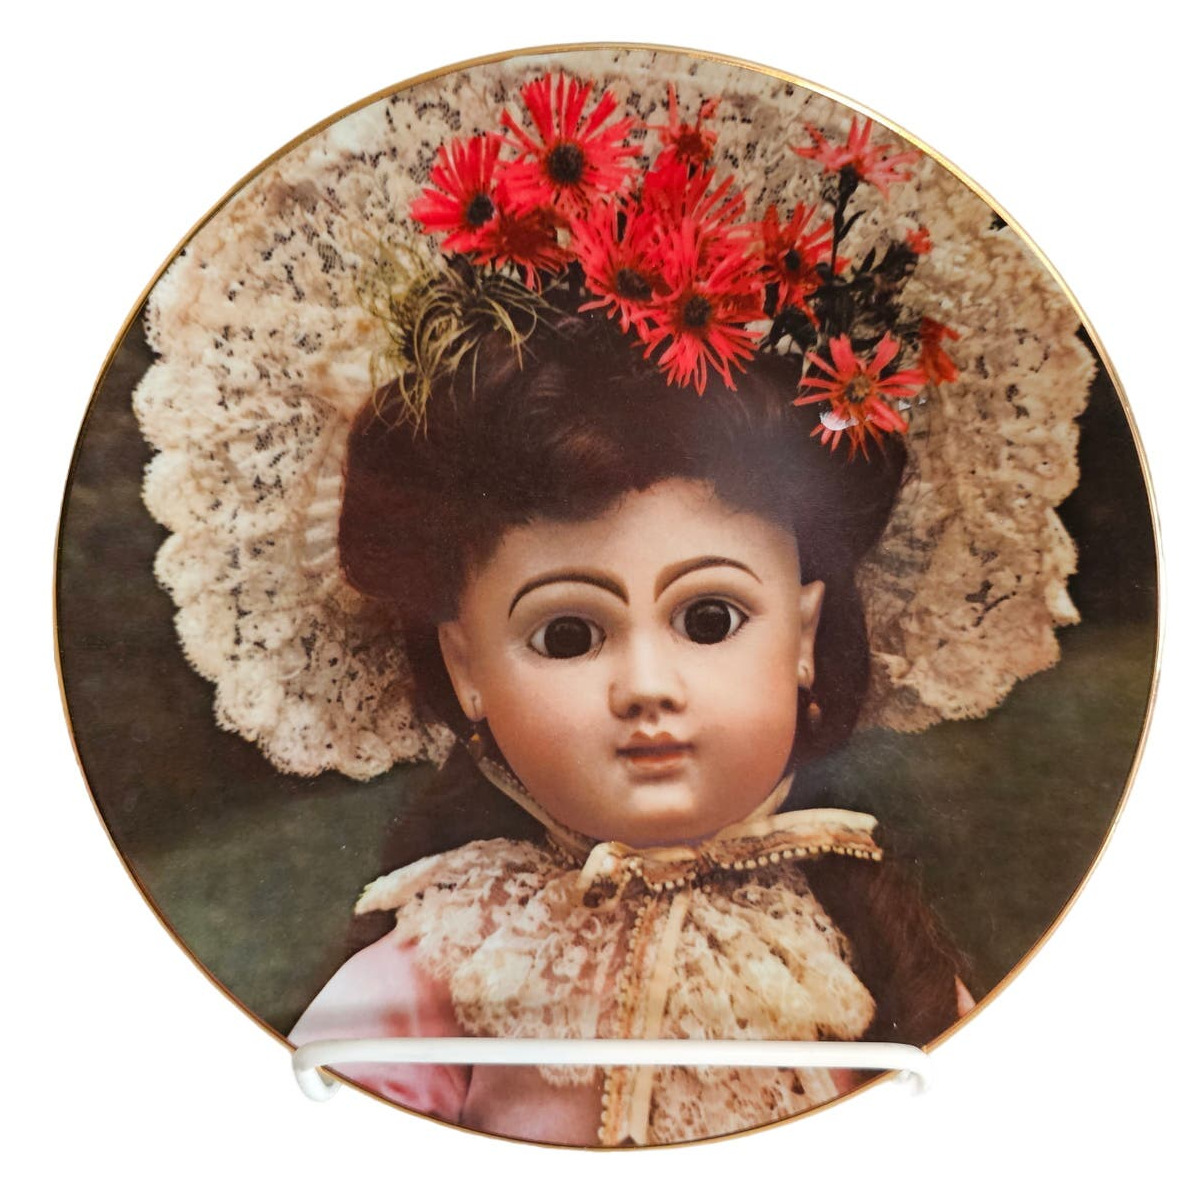 The Doll Collection of Old French Dolls Porcelain Plate Alexandre Numbered Seely